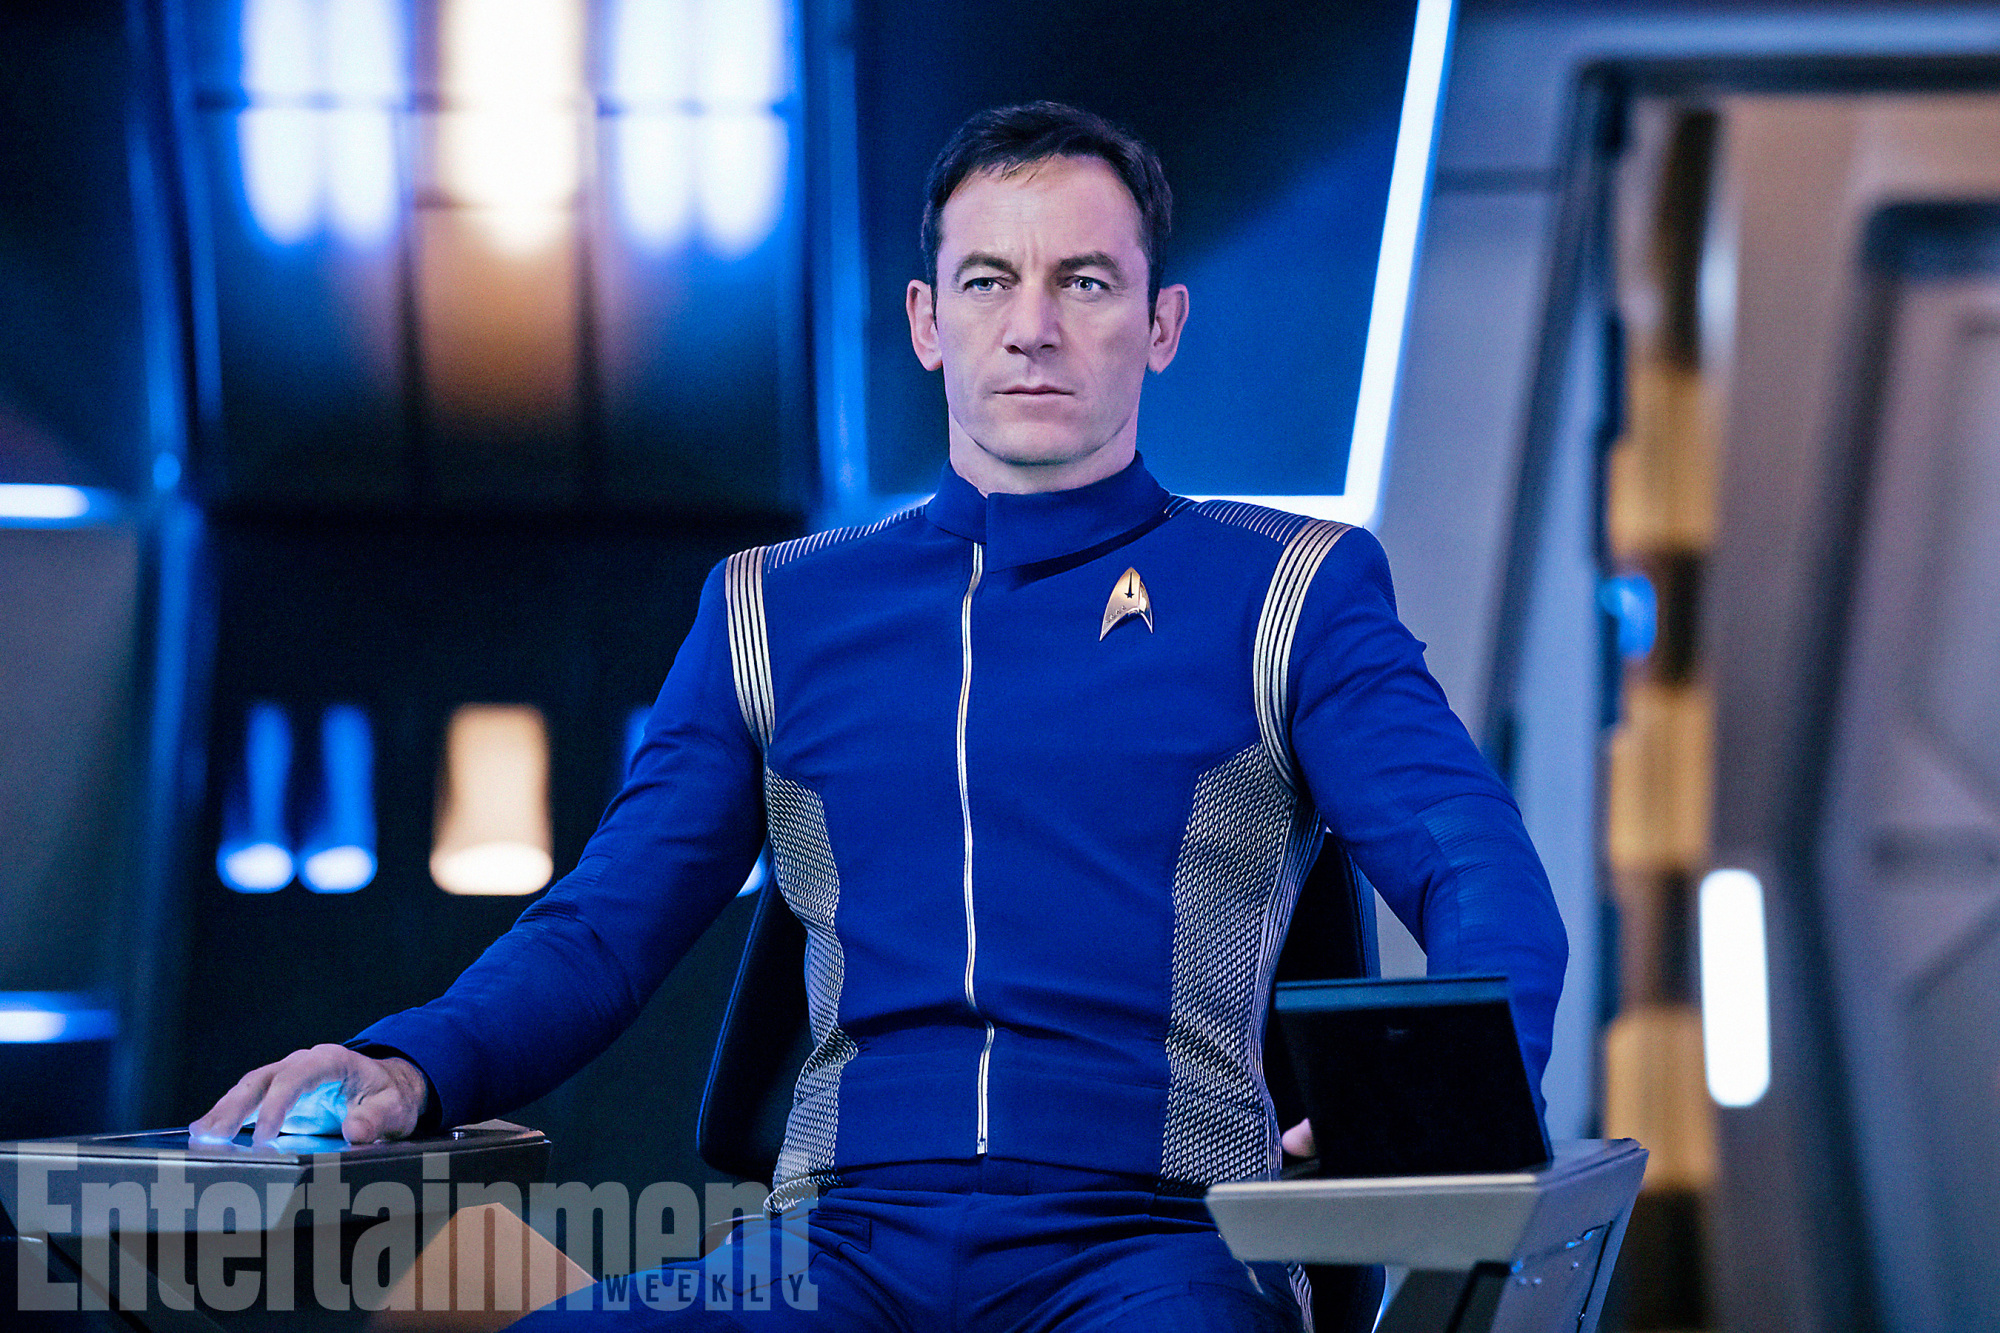 STLV18: Jason Isaacs Talks Canon, Controversy, Space Wedgies And Why